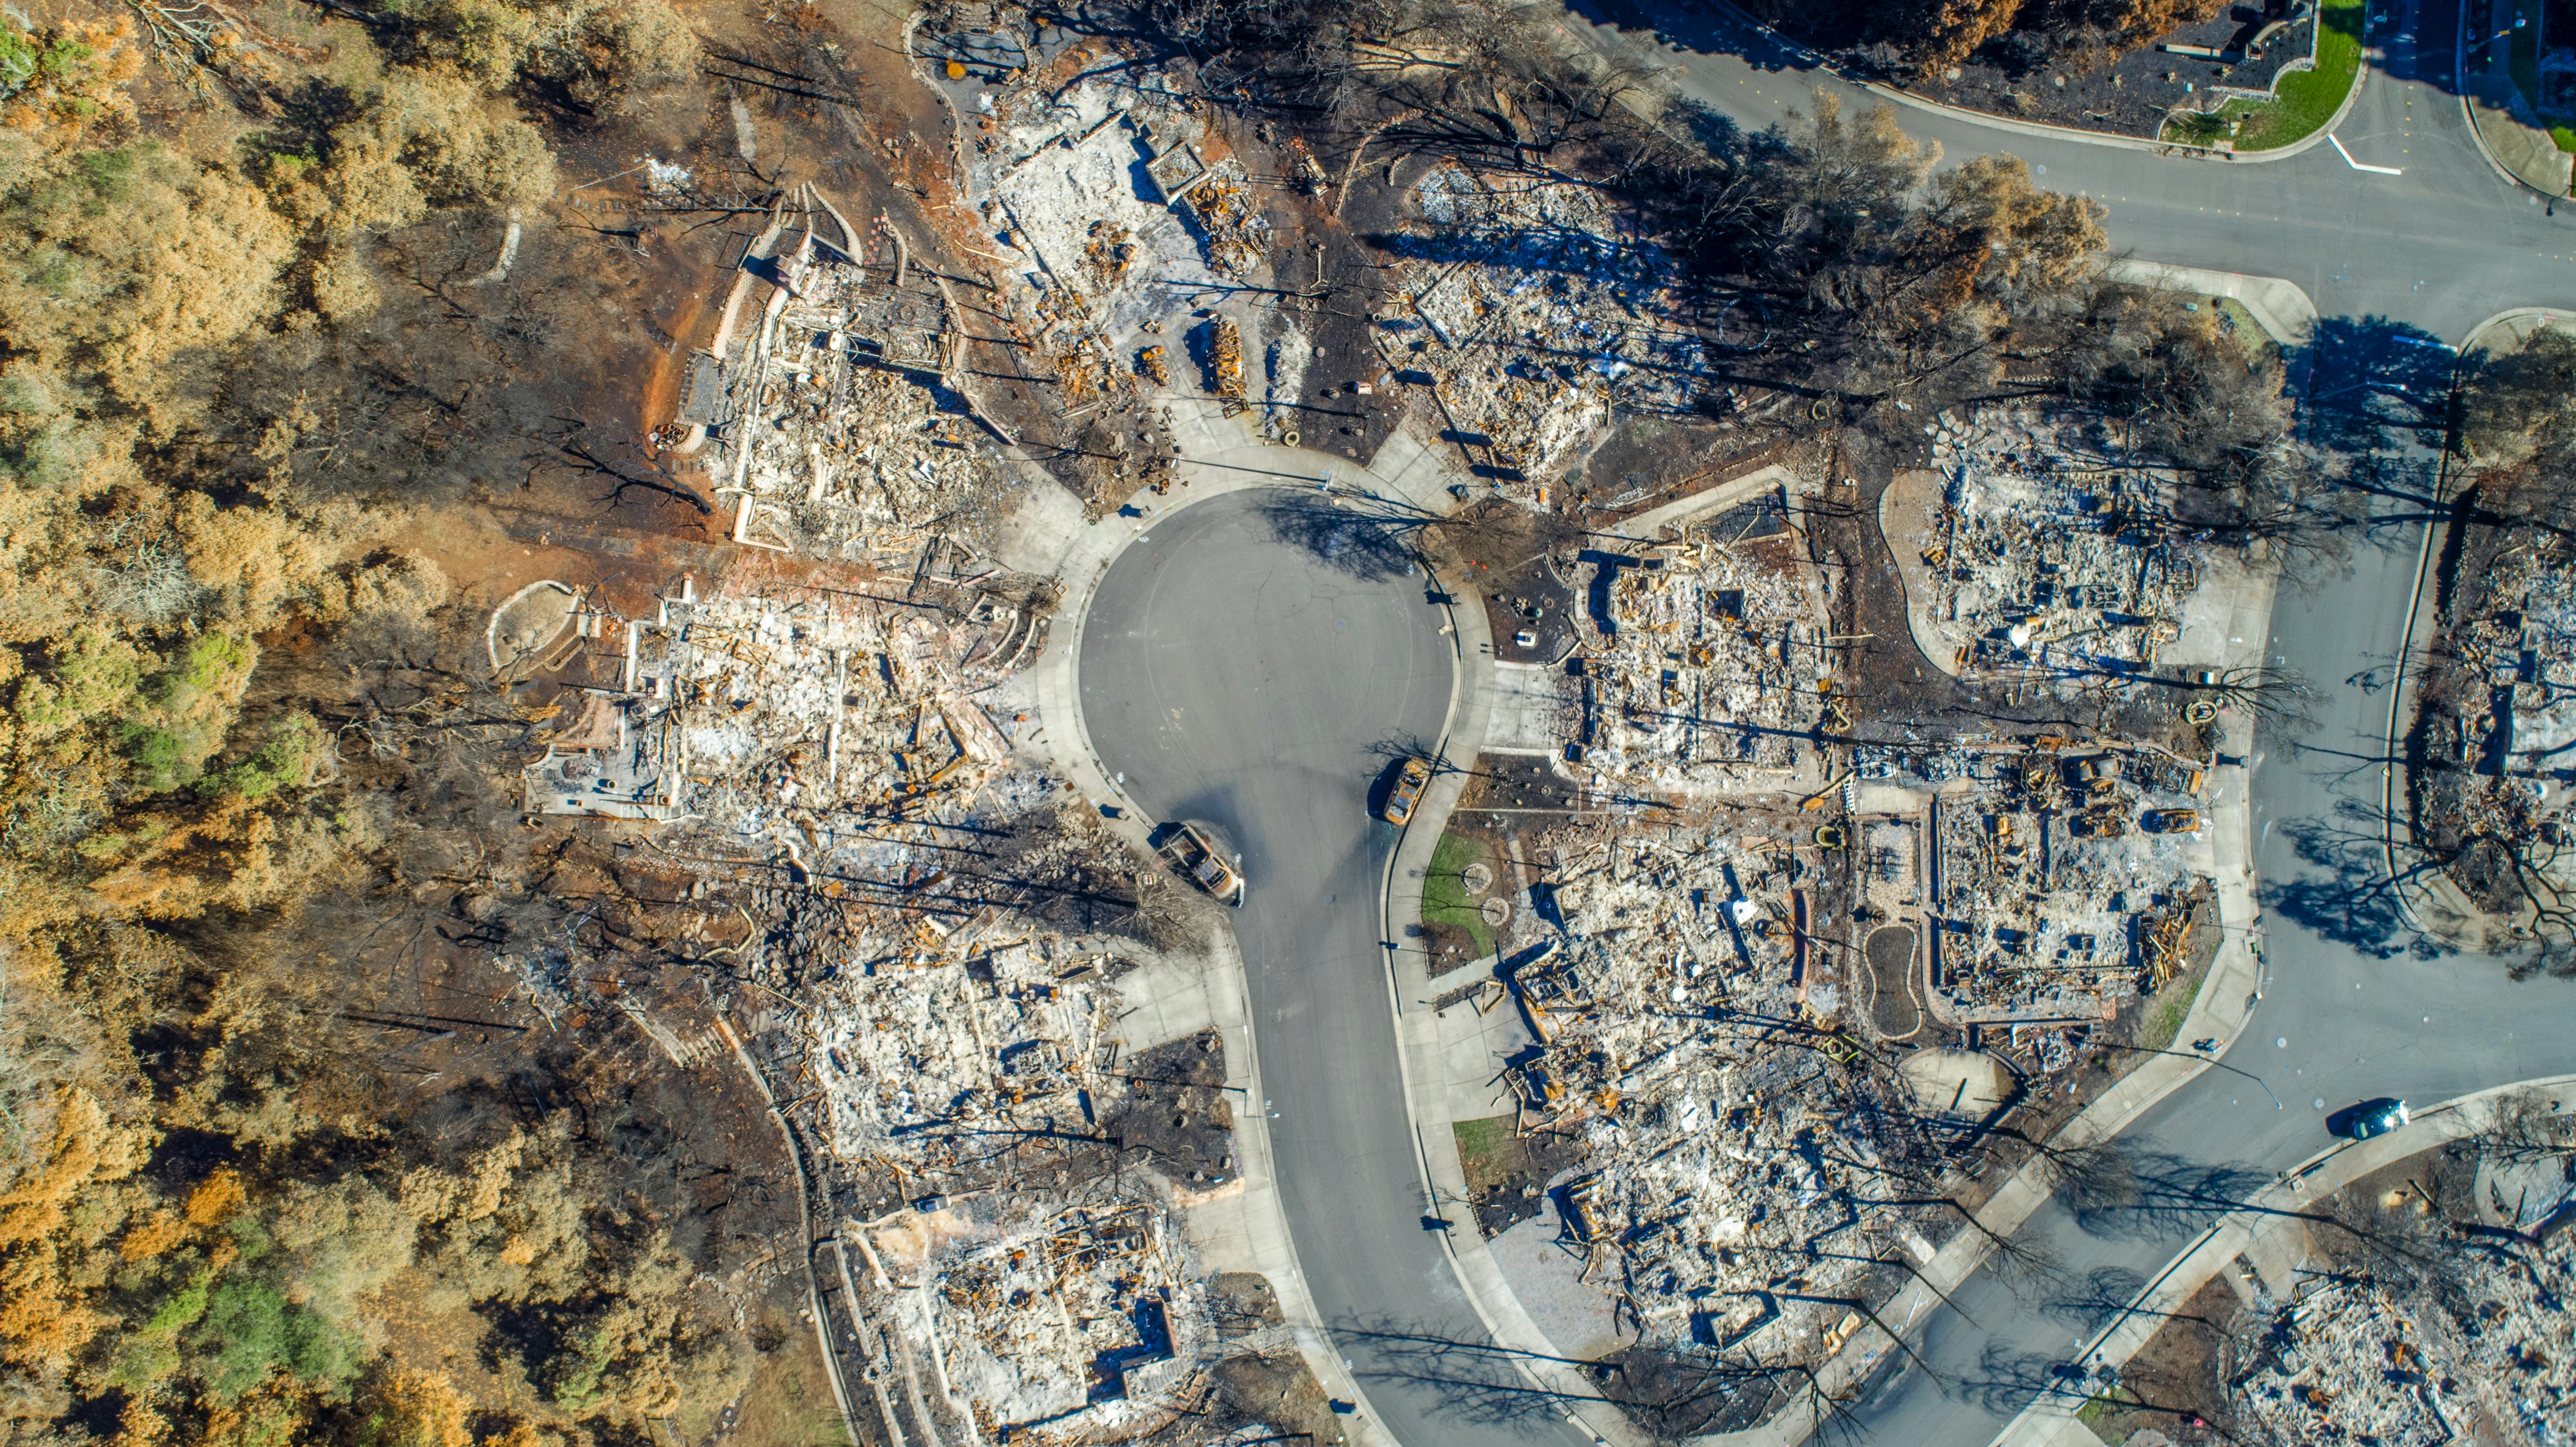 A neighborhood reduced to ash after a wildfire